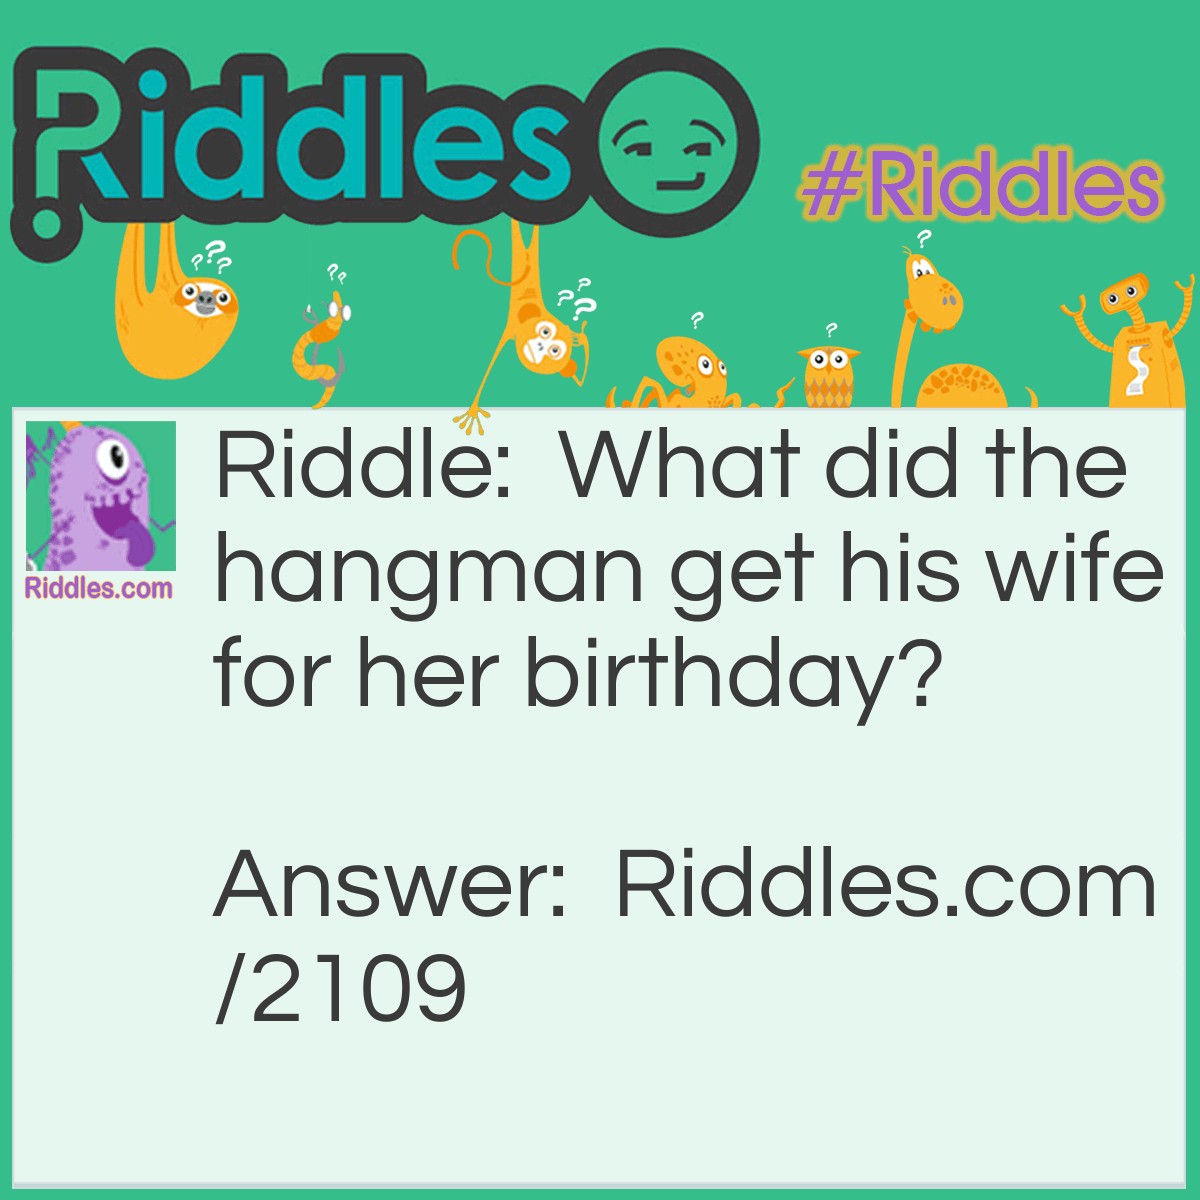 Riddle: What did the hangman get his wife for her birthday? Answer: A Choker.